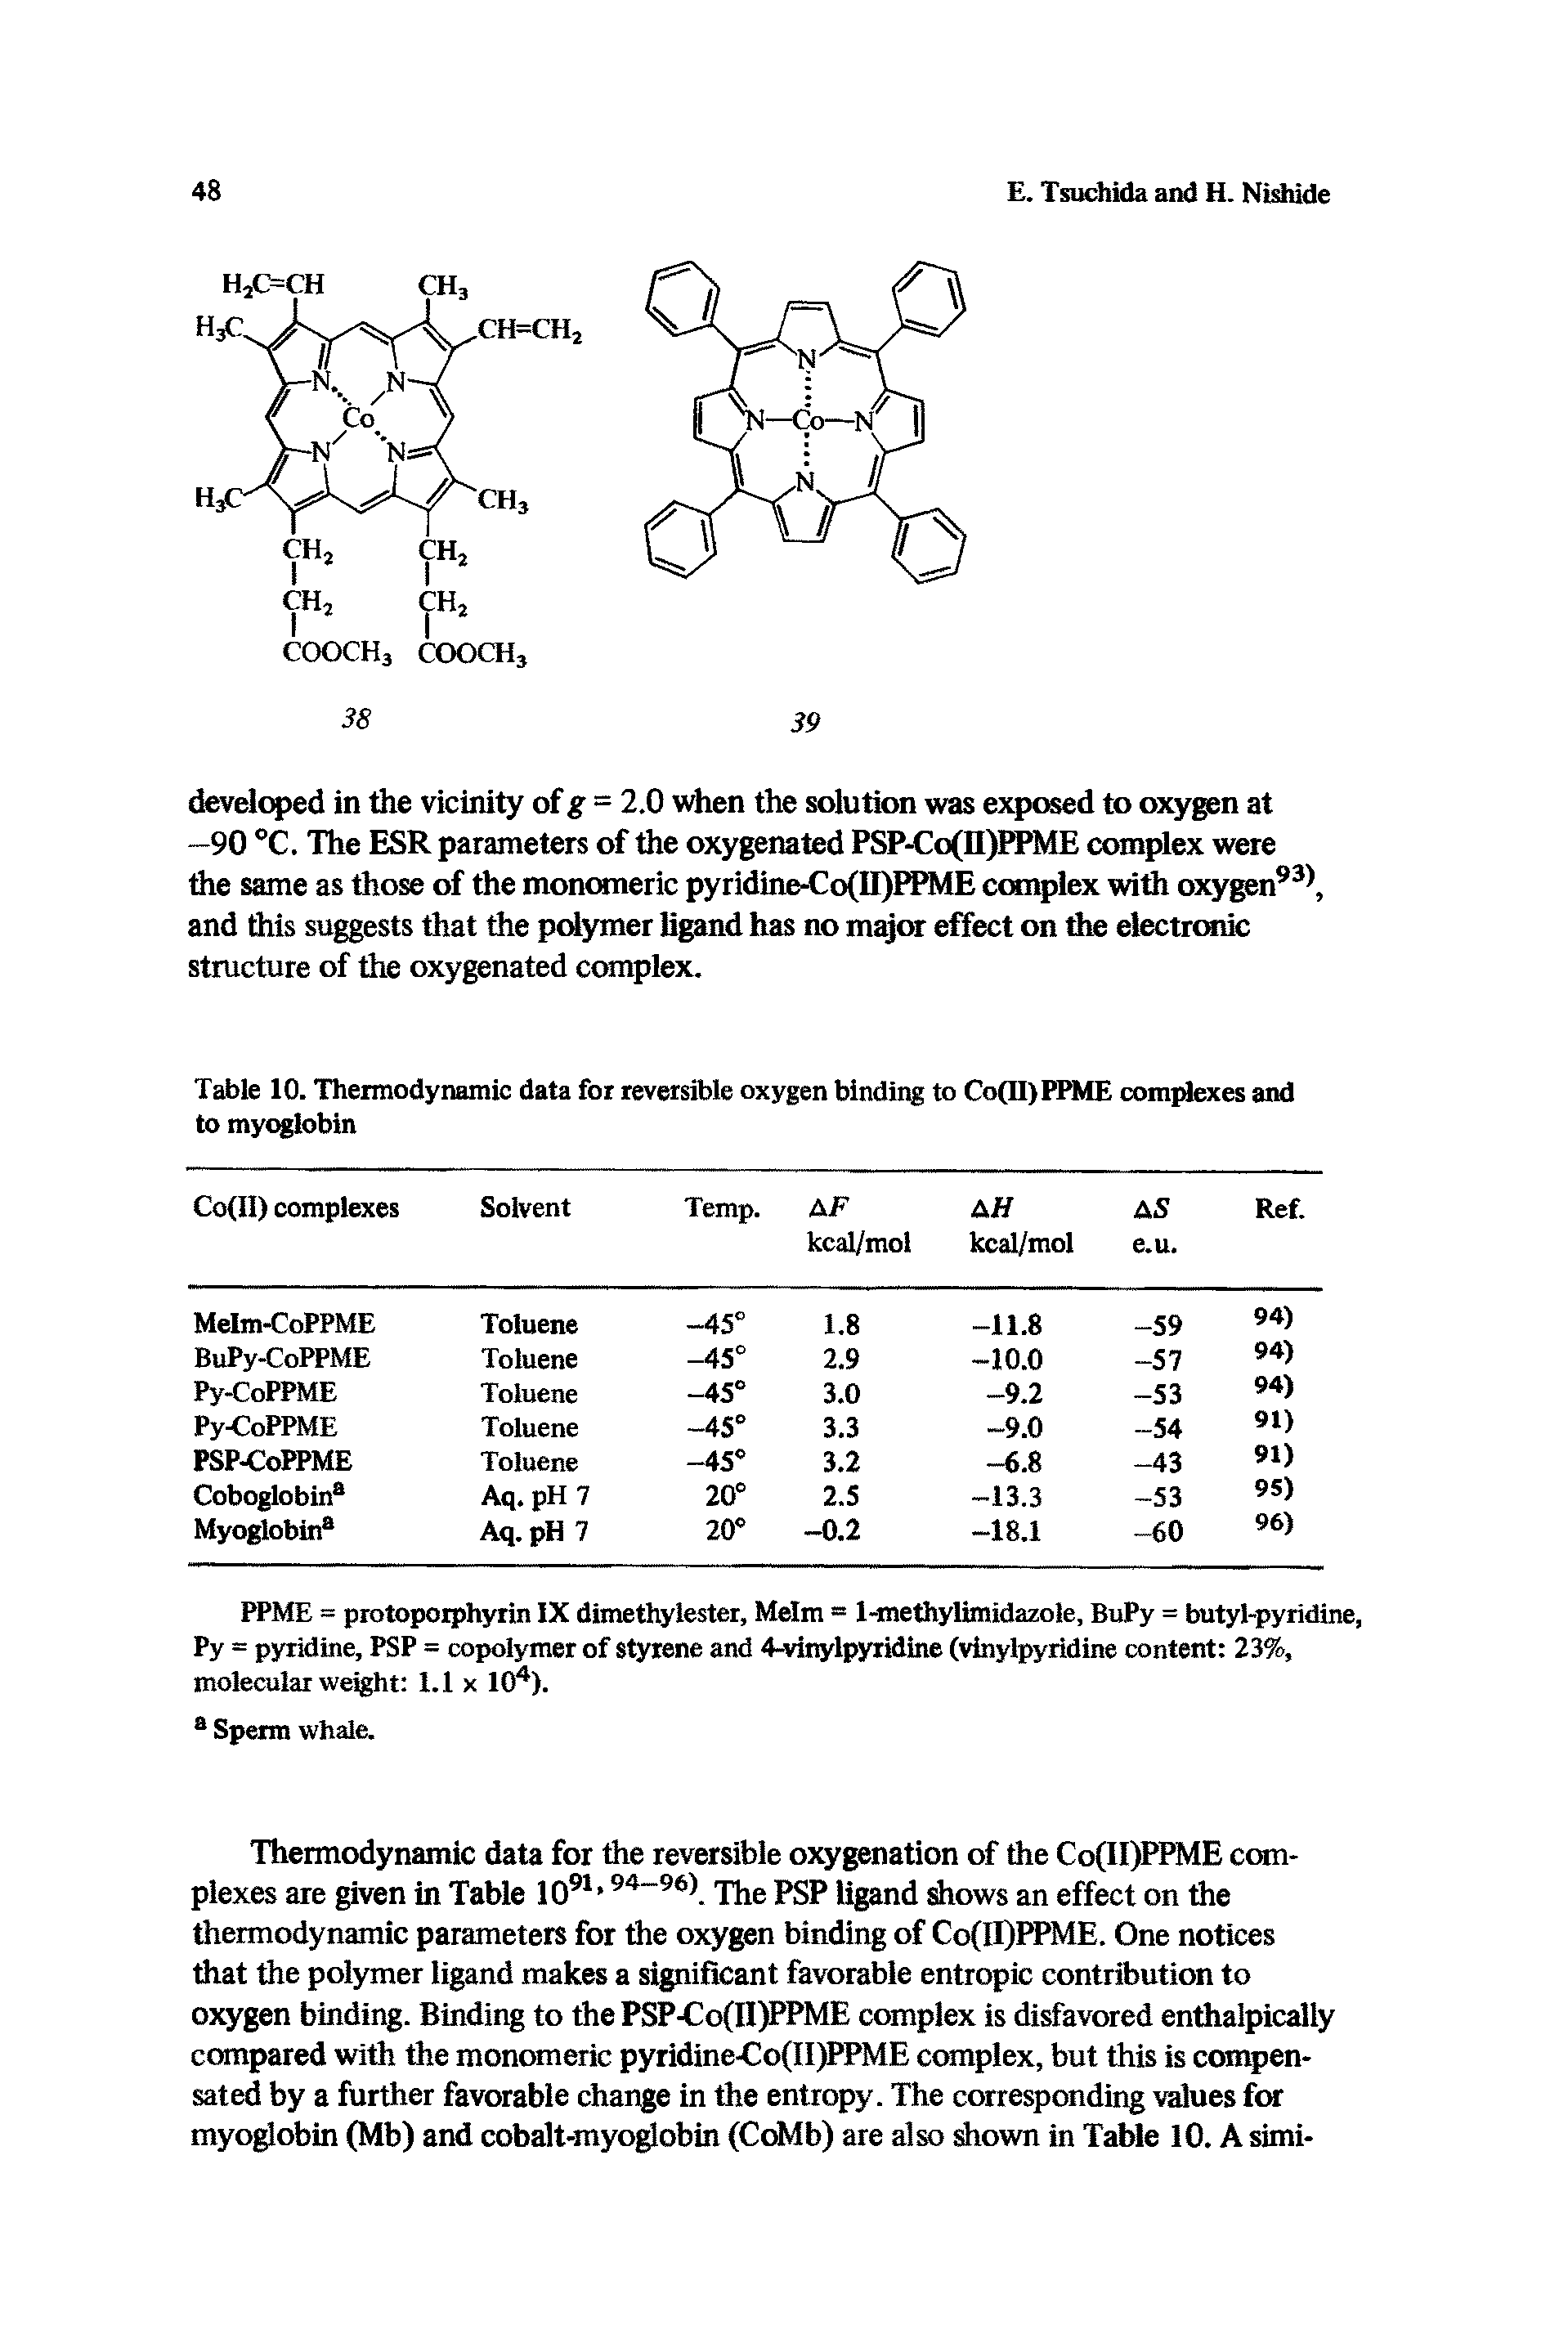 Table 10. Thermodynamic data for reversible oxygen binding to Co(II)PPME complexes and to myoglobin...